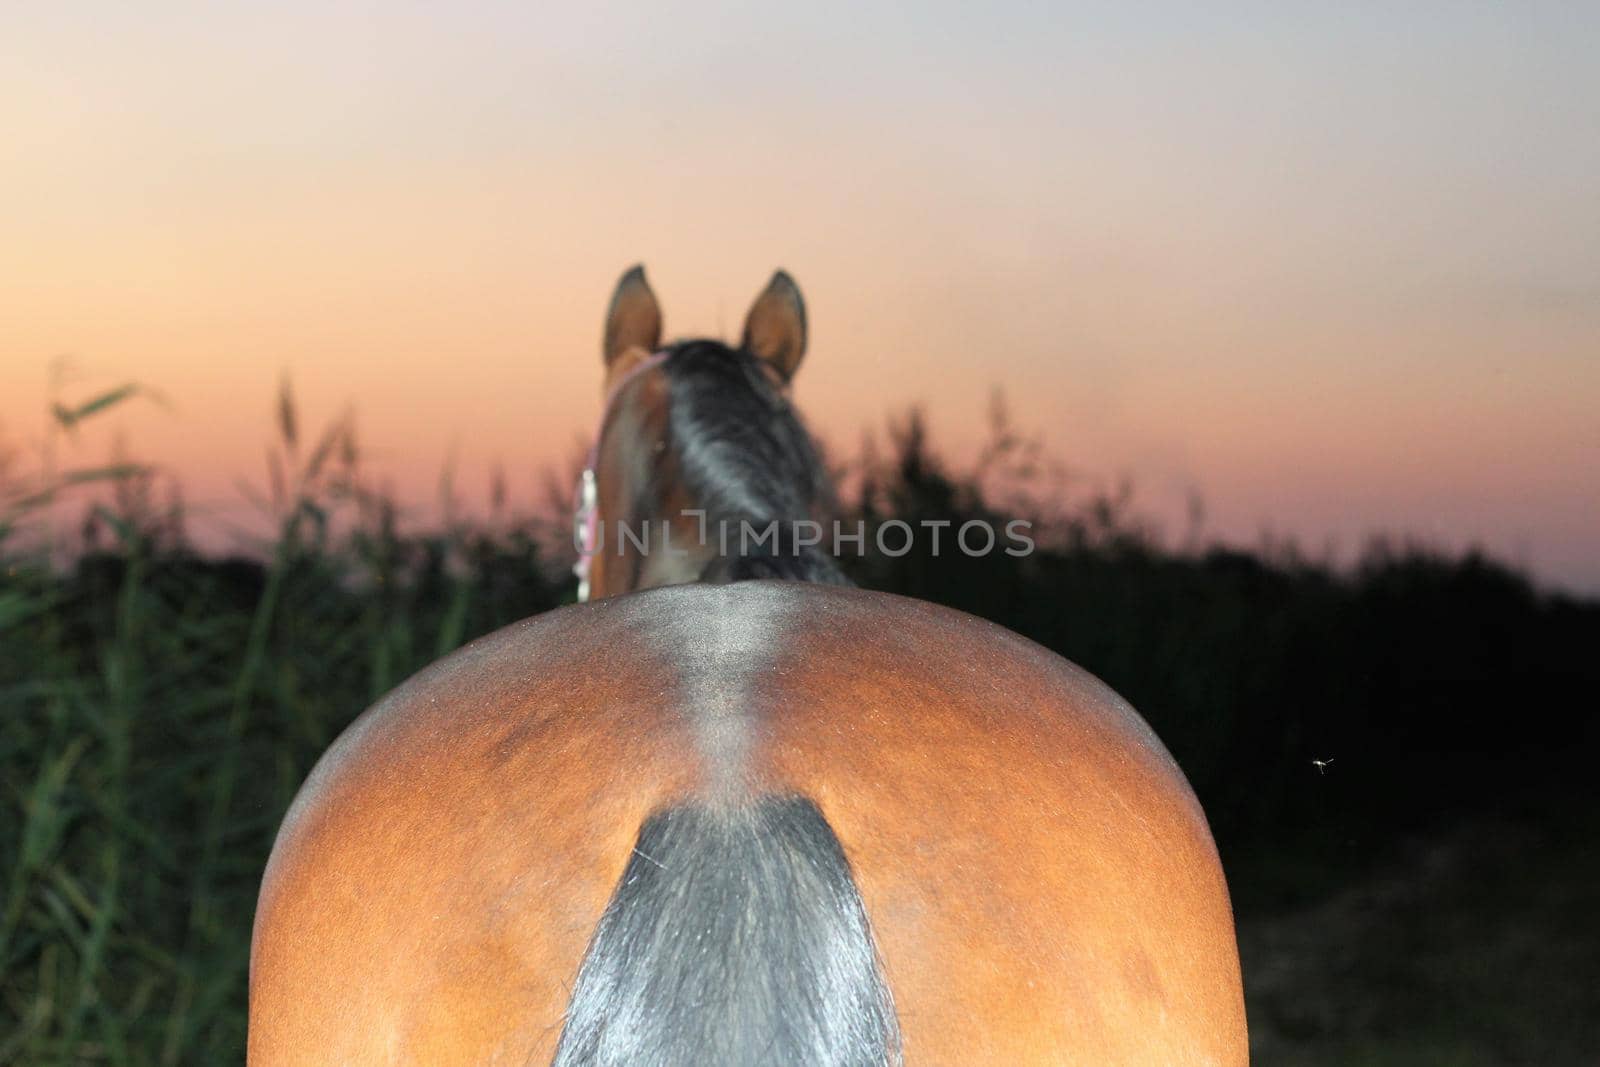 Beautyful sunset with a brown horse and reeds in the foreground